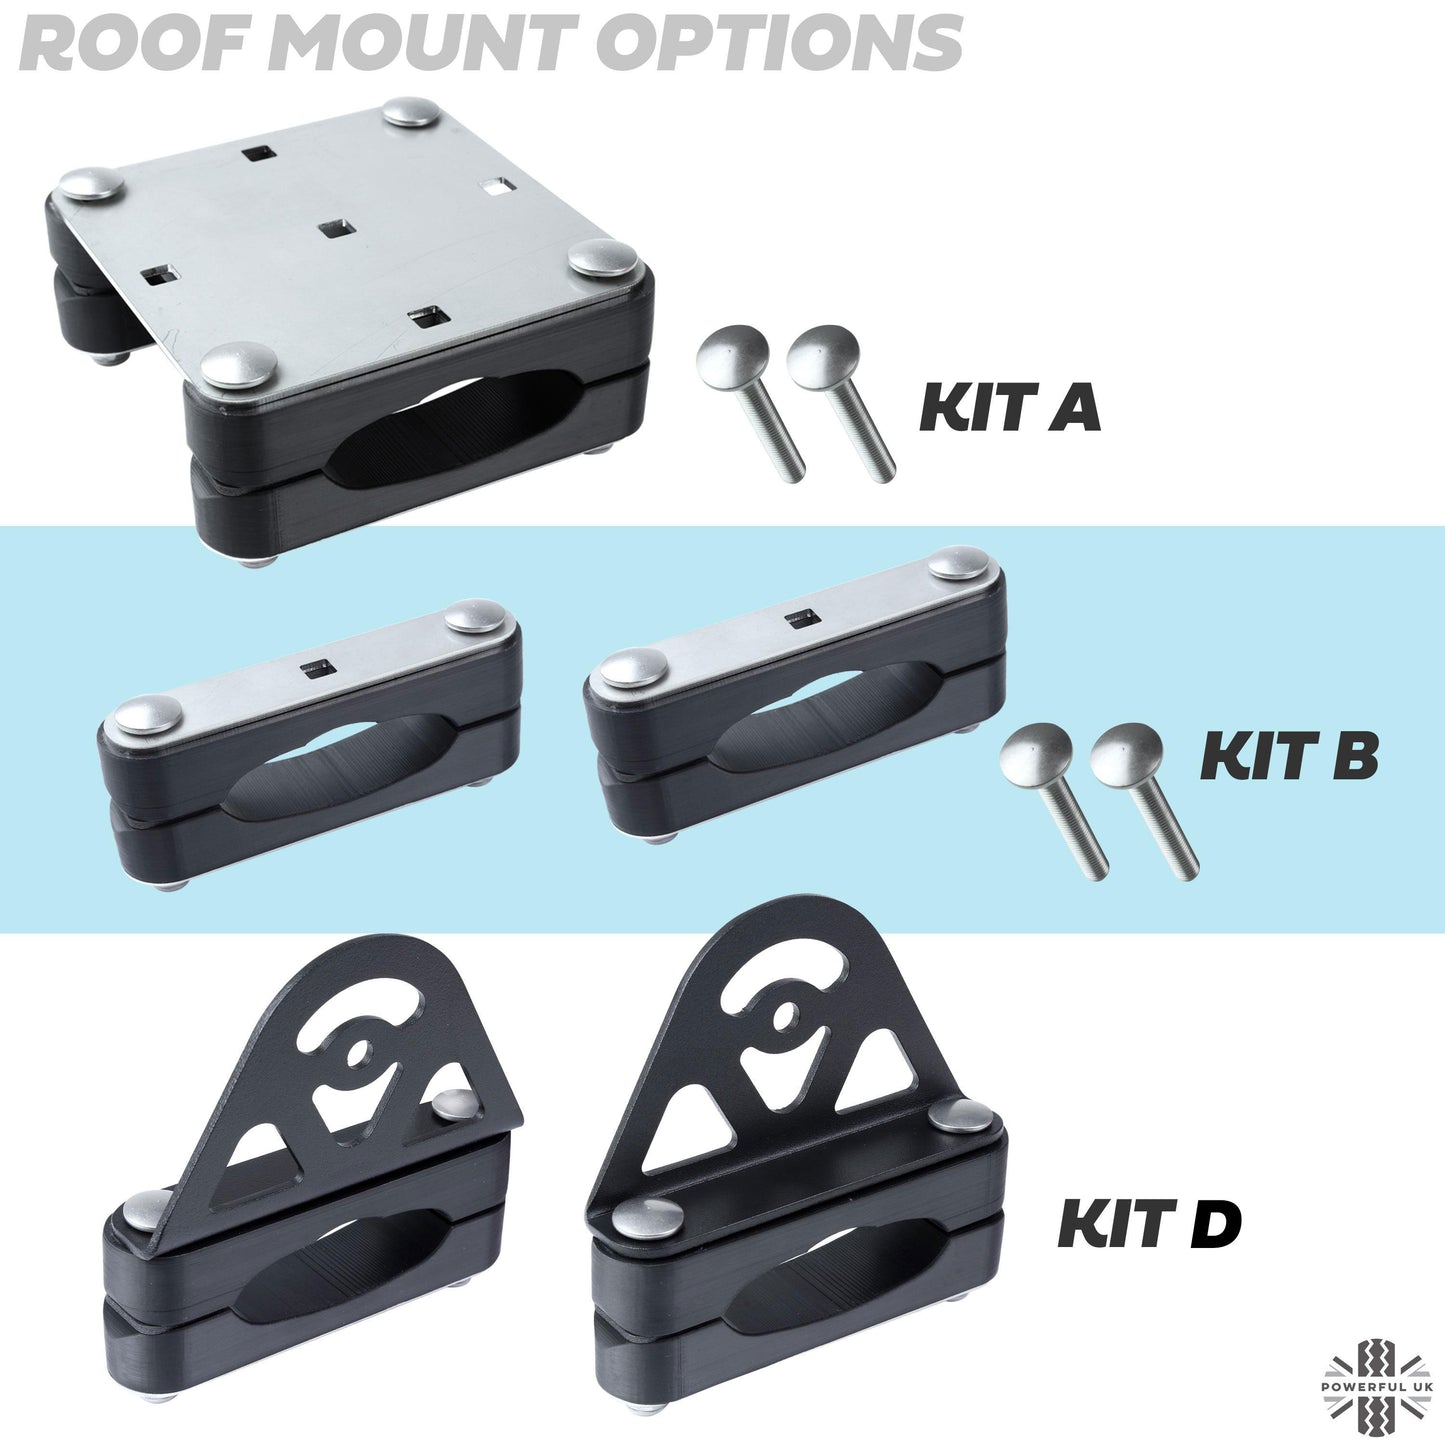 Roof Cross Bar Mount Clamp Kit for the Land Rover Discovery 5 - Kit A - Stainless Steel Top